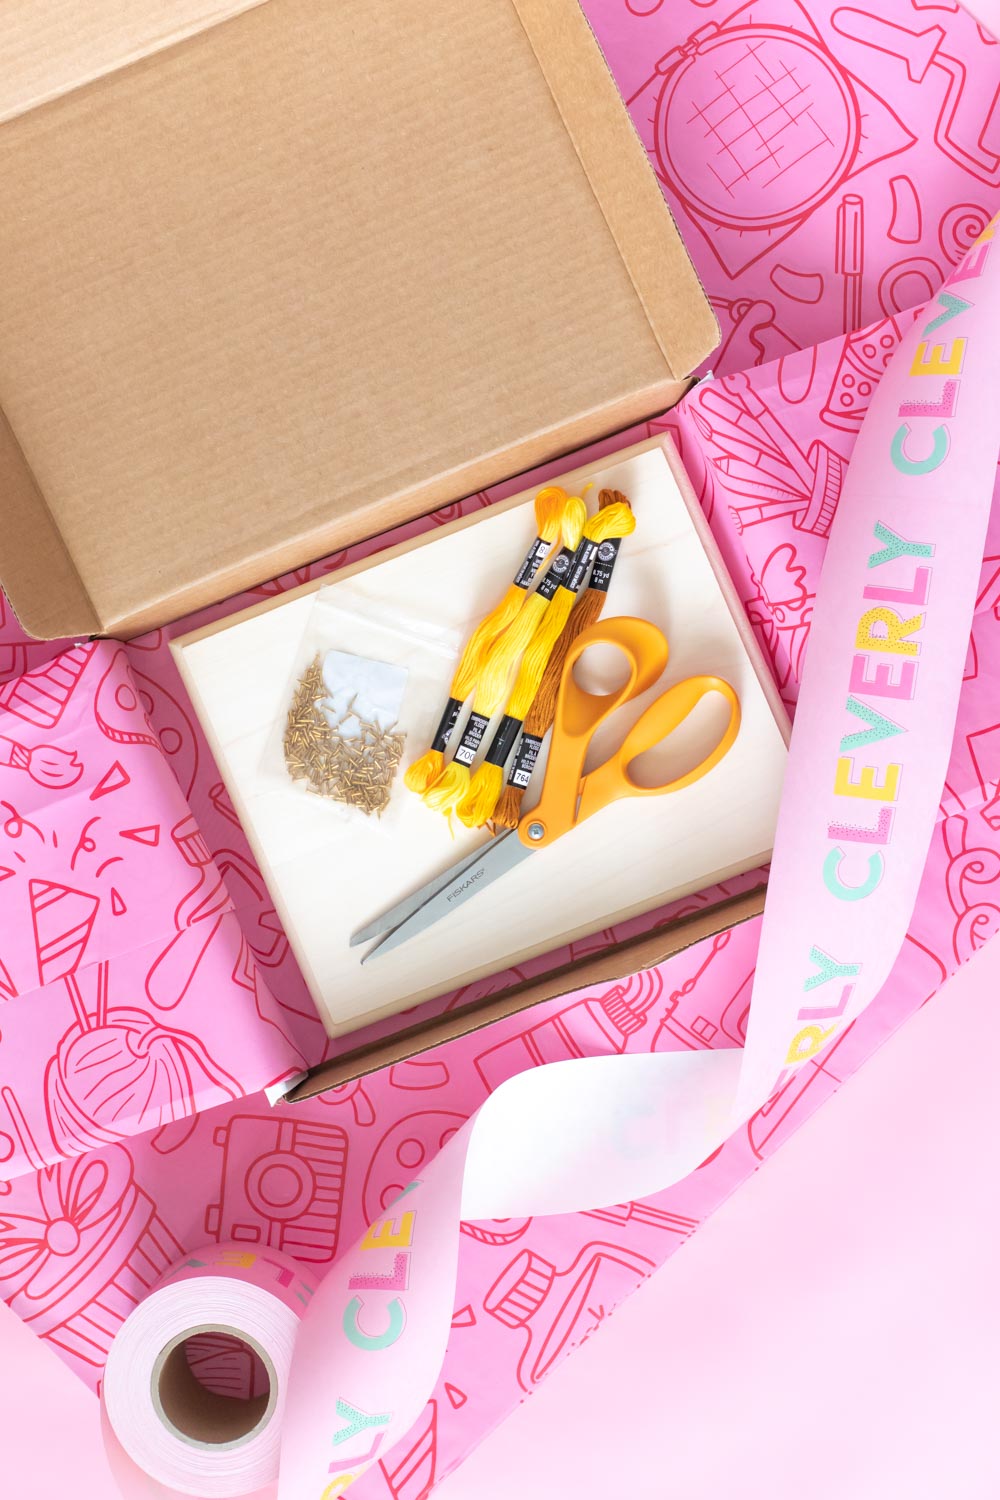 shipping box with craft supplies on pink background